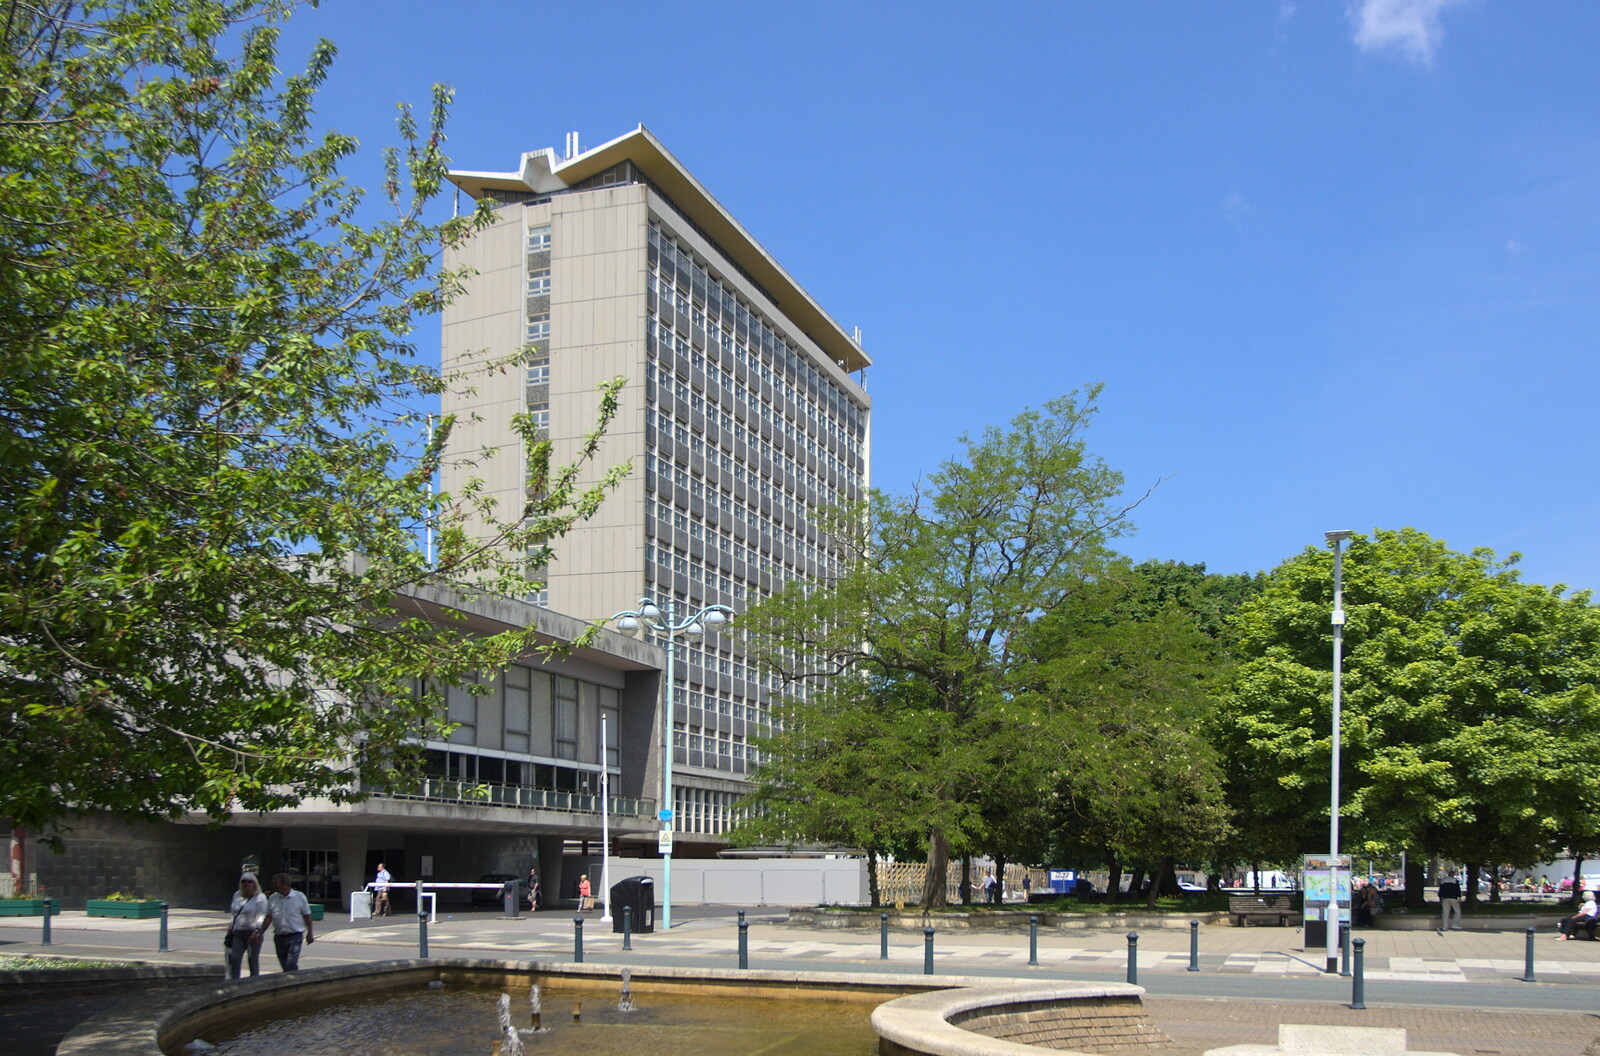 The Civic Centre: 1960s concrete from A Tamar River Trip, Plymouth, Devon - 30th May 2016